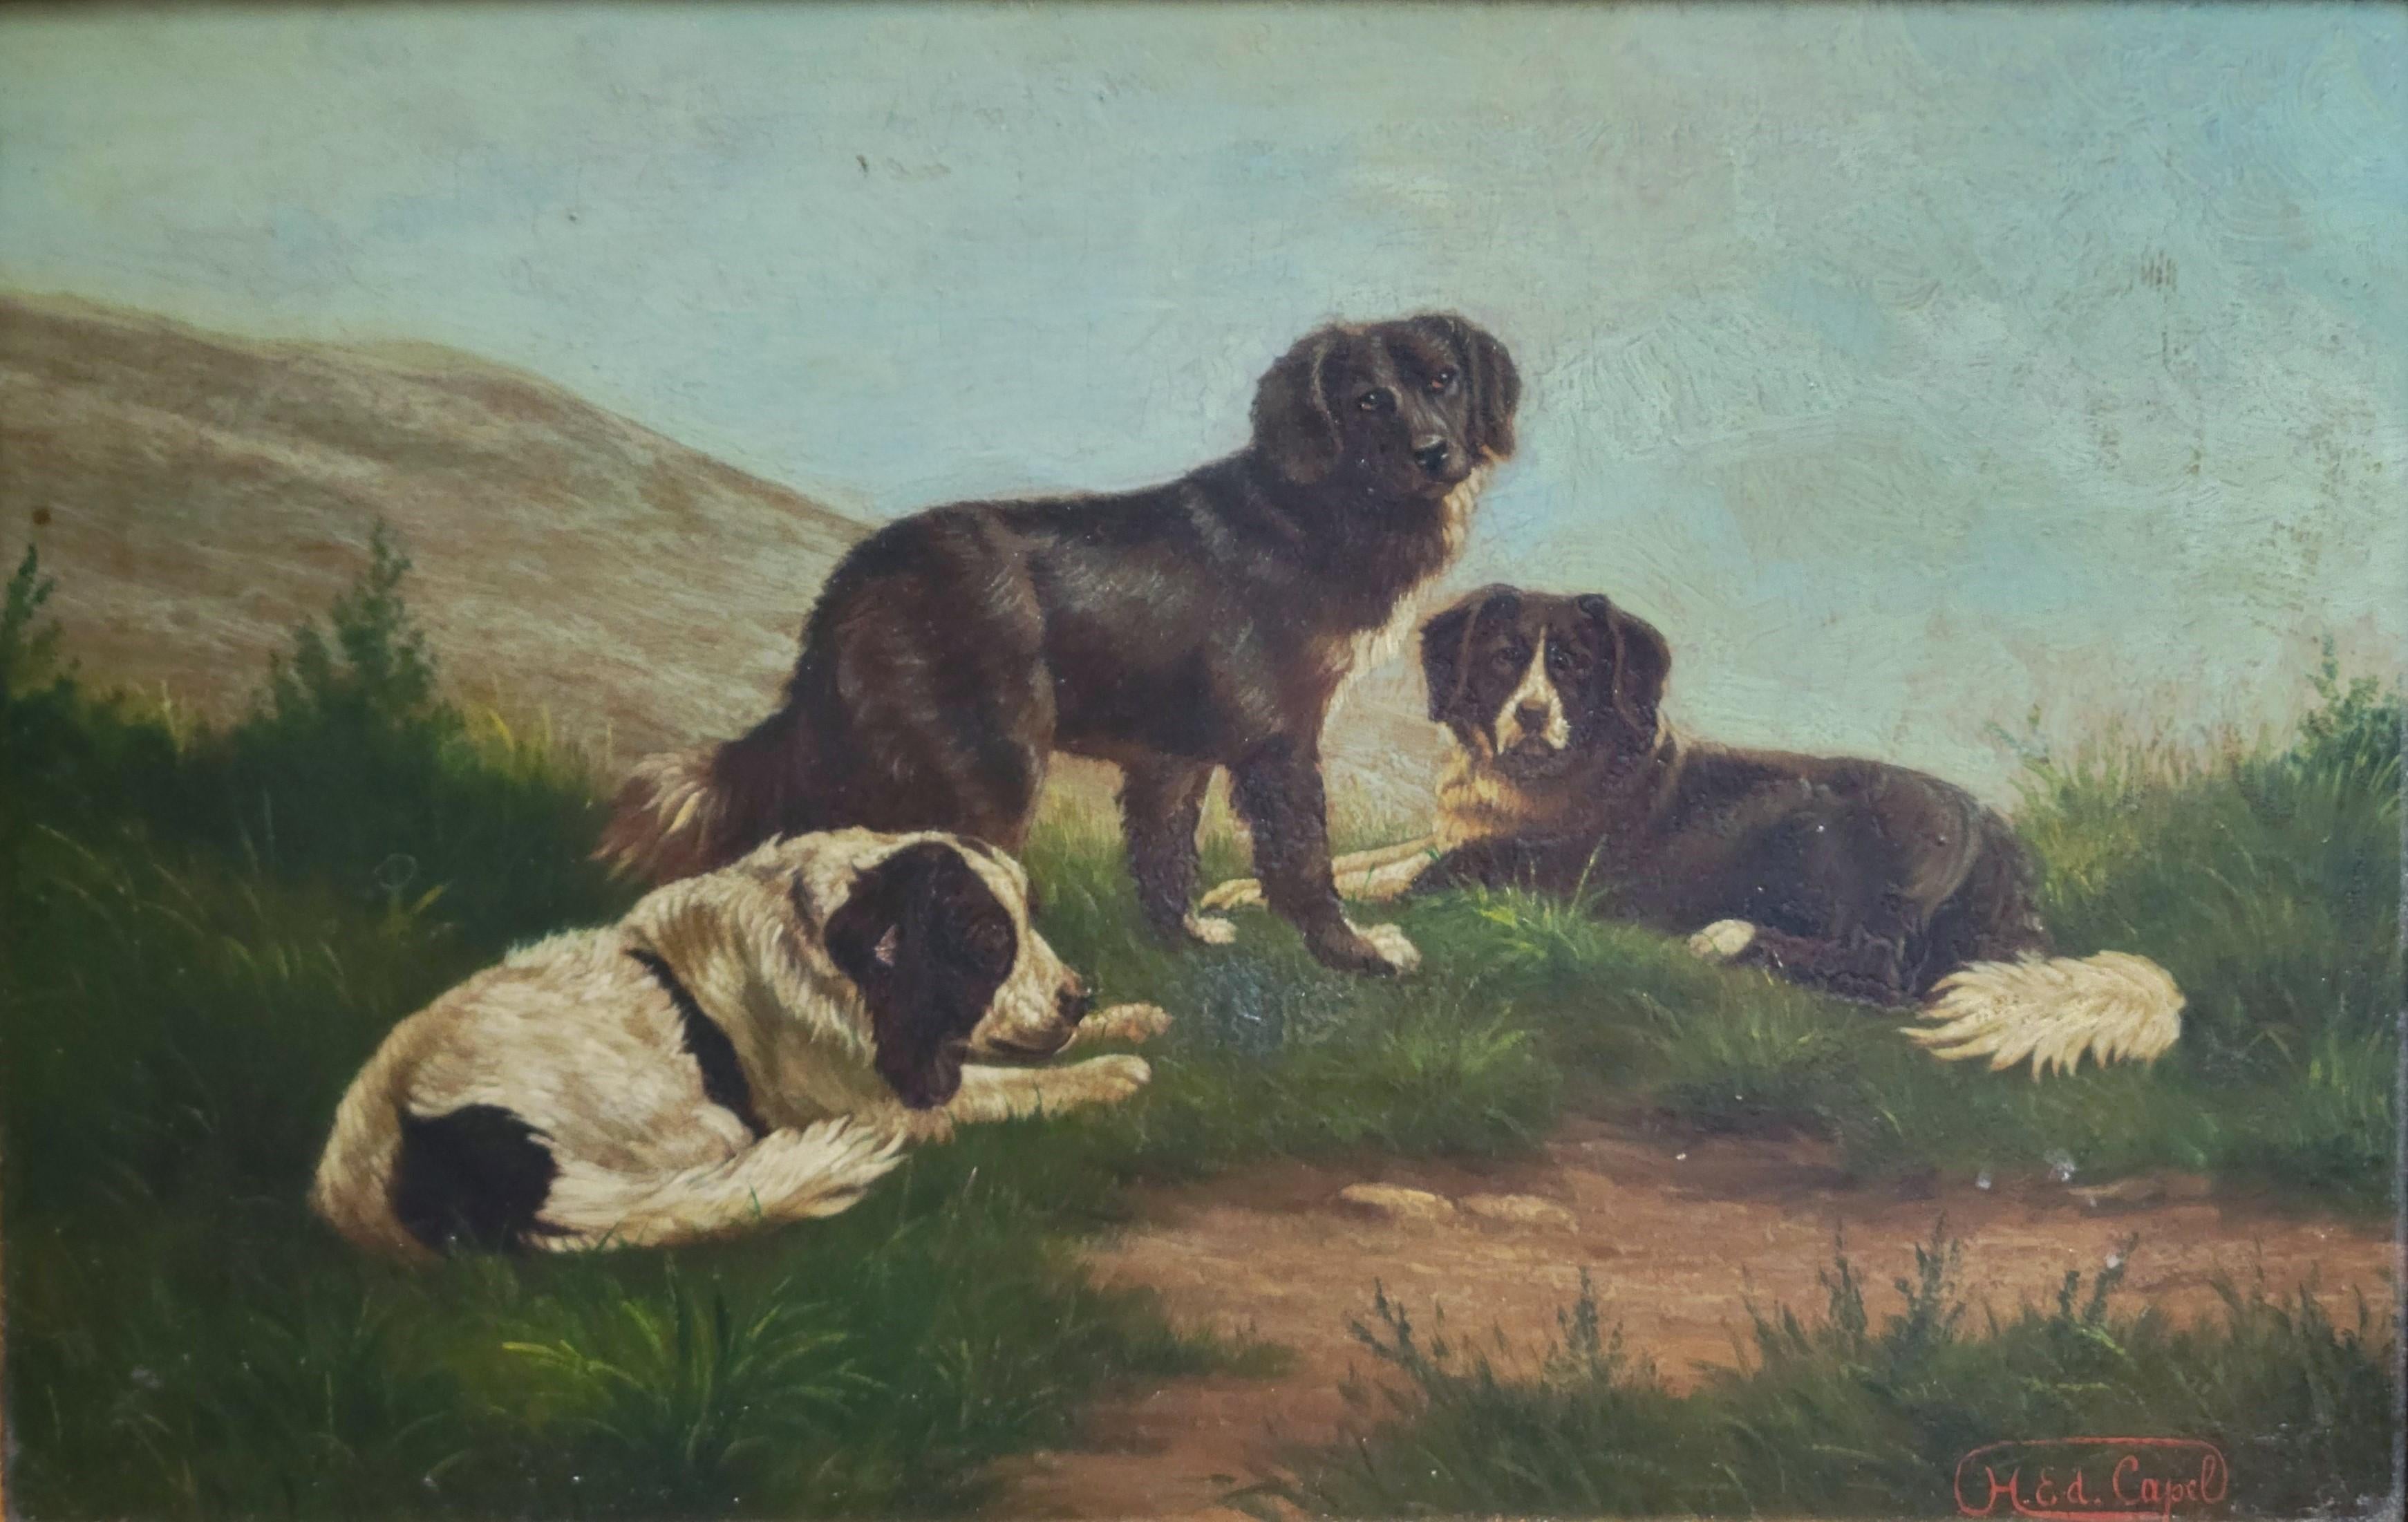 An absolutely beautiful vintage oil painting on mahogany panel of three black and white dogs, perhaps Border Collies. The painting is skillfully painted and signed by H. Ed. Capel. The French inscription on the back indicates that the painting was a